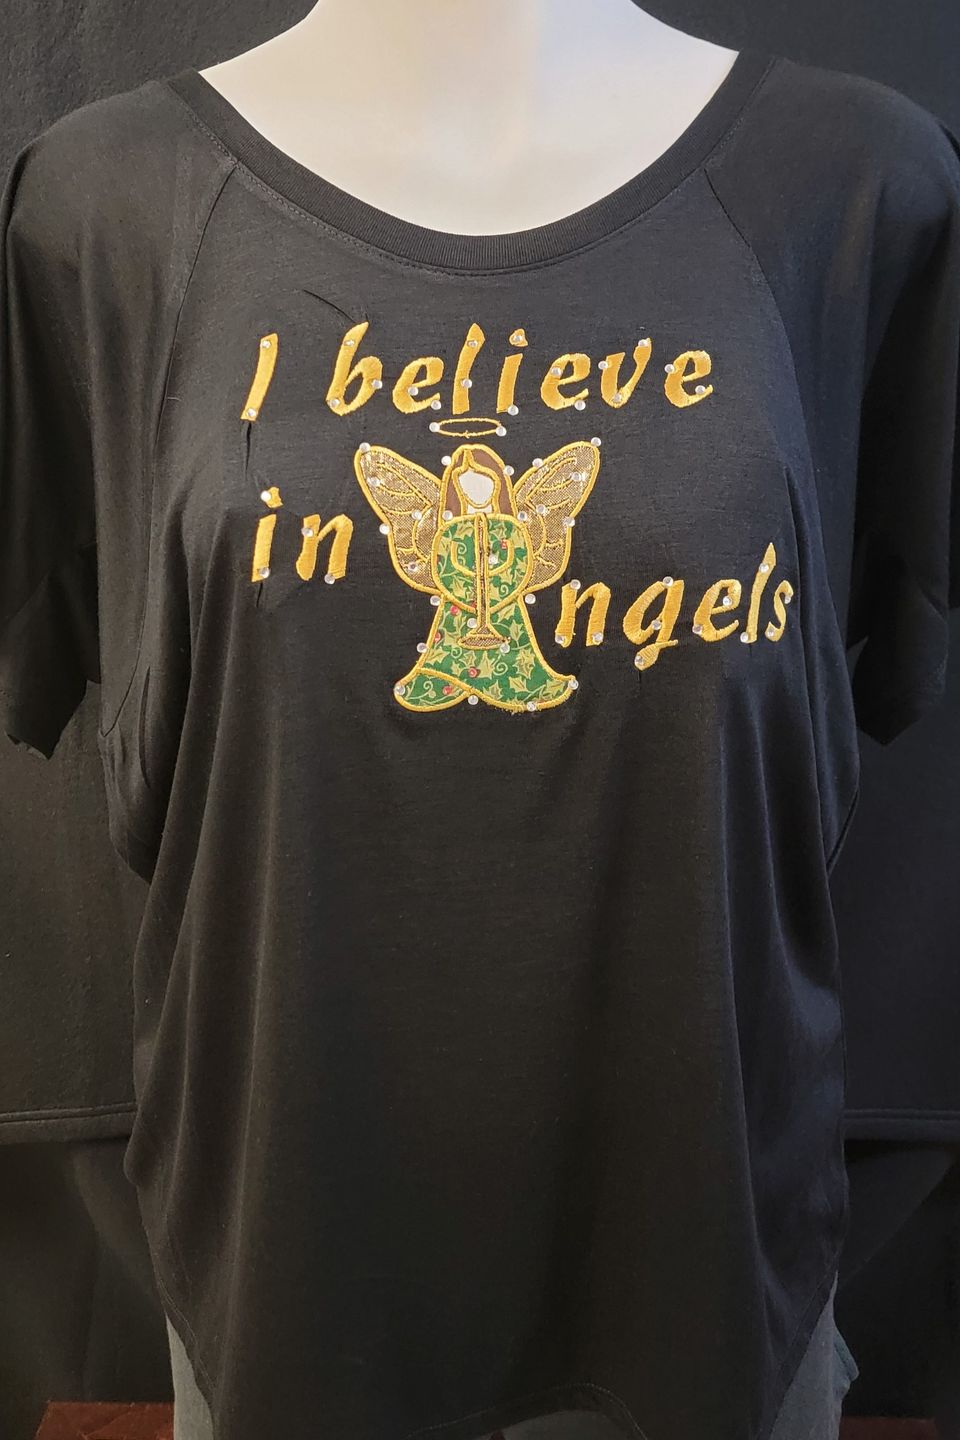 "I believe in Angels" Christmas t-shirt designed by SaRi's Creations using Direct to Film (DTF) technique. 